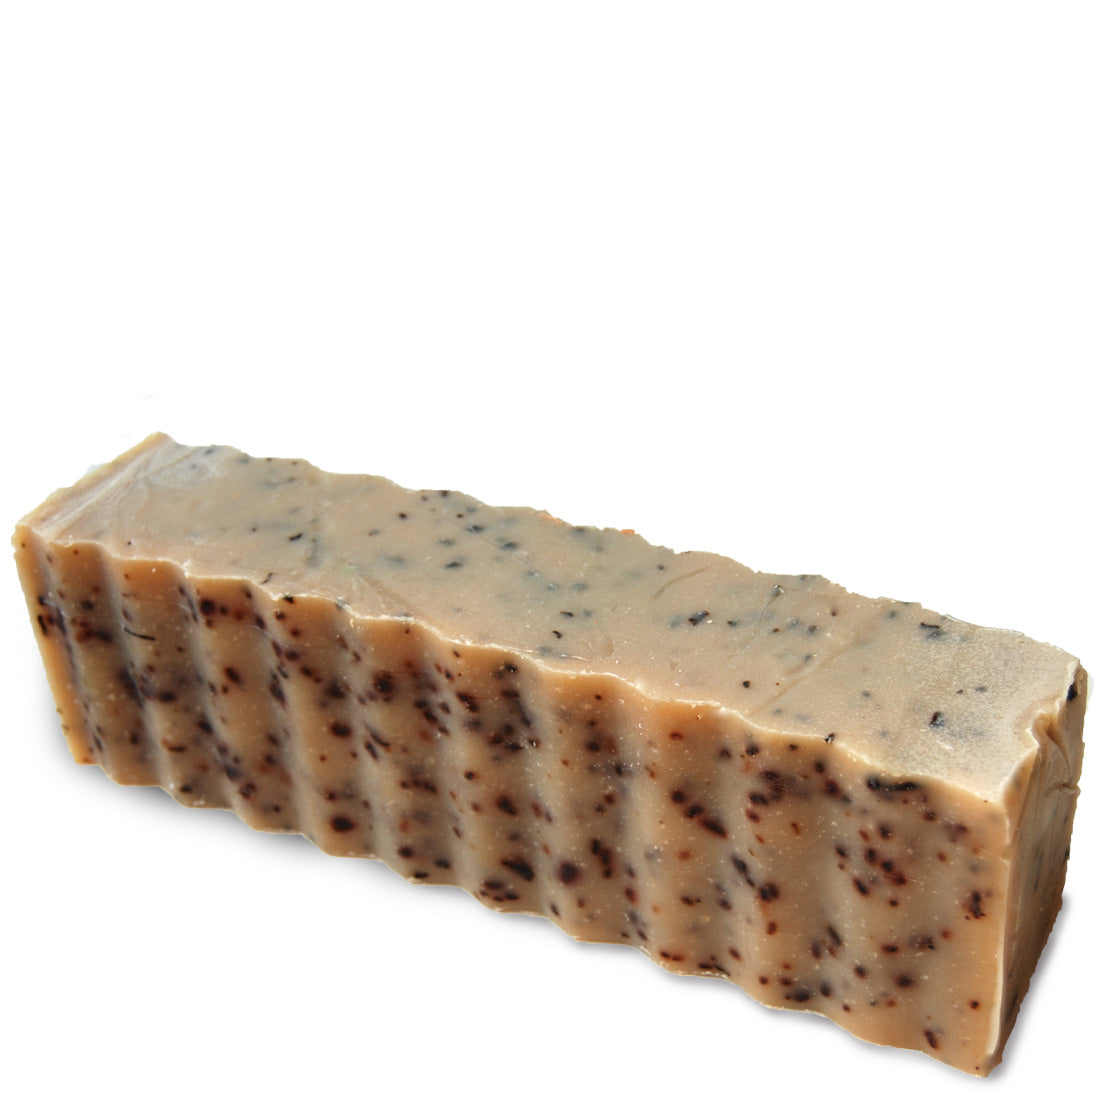 Speckled brown colored wavy rectangular 45 ounce brick of patchouli scented Zum Bar Soap